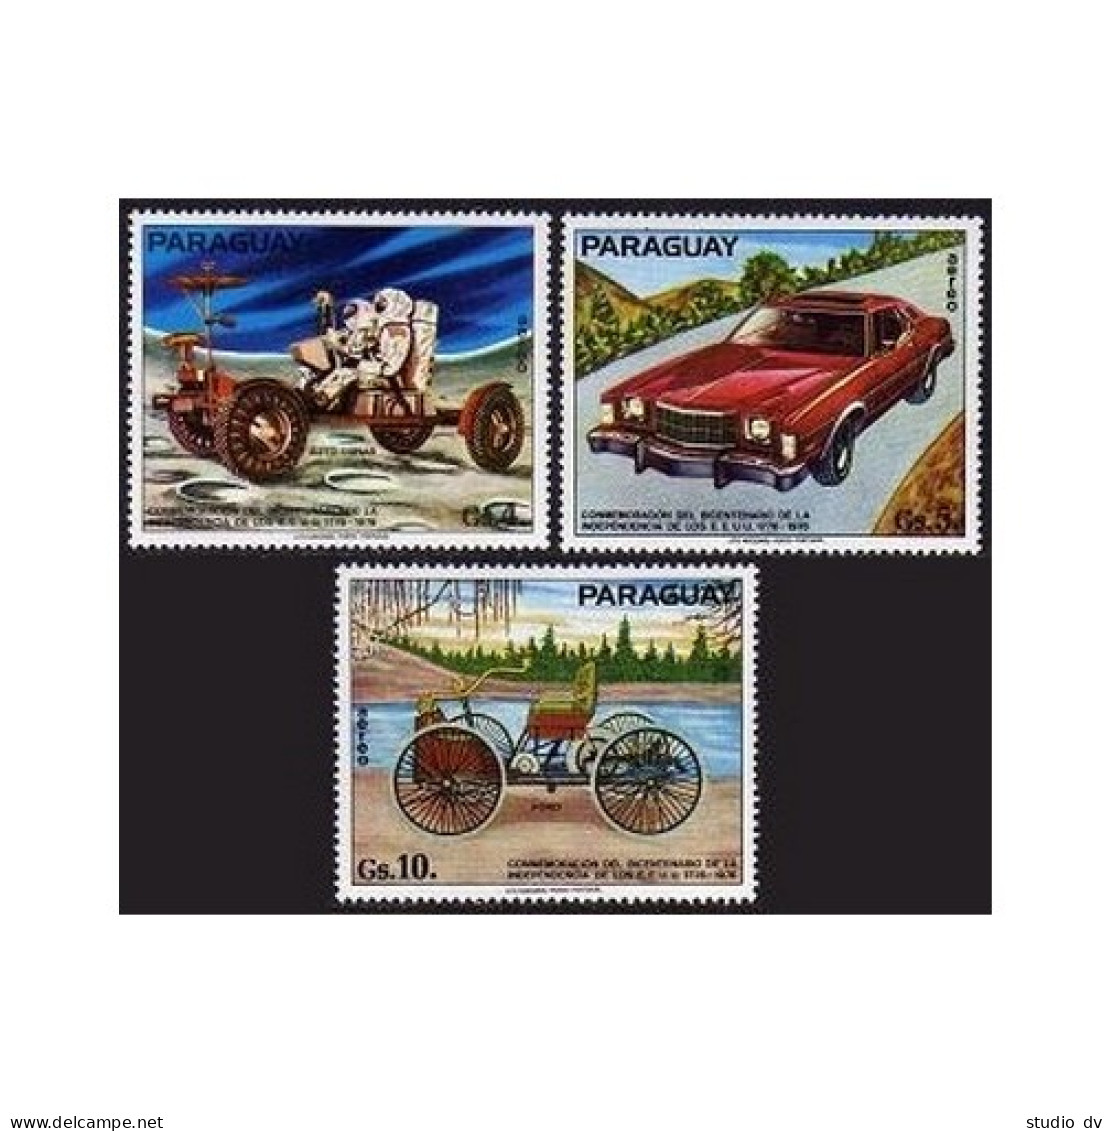 Paraguay C421a-C421c, Hinged. USA-200, 1975. Lunar Rover, Fort Elite, Ford 1896. - Paraguay